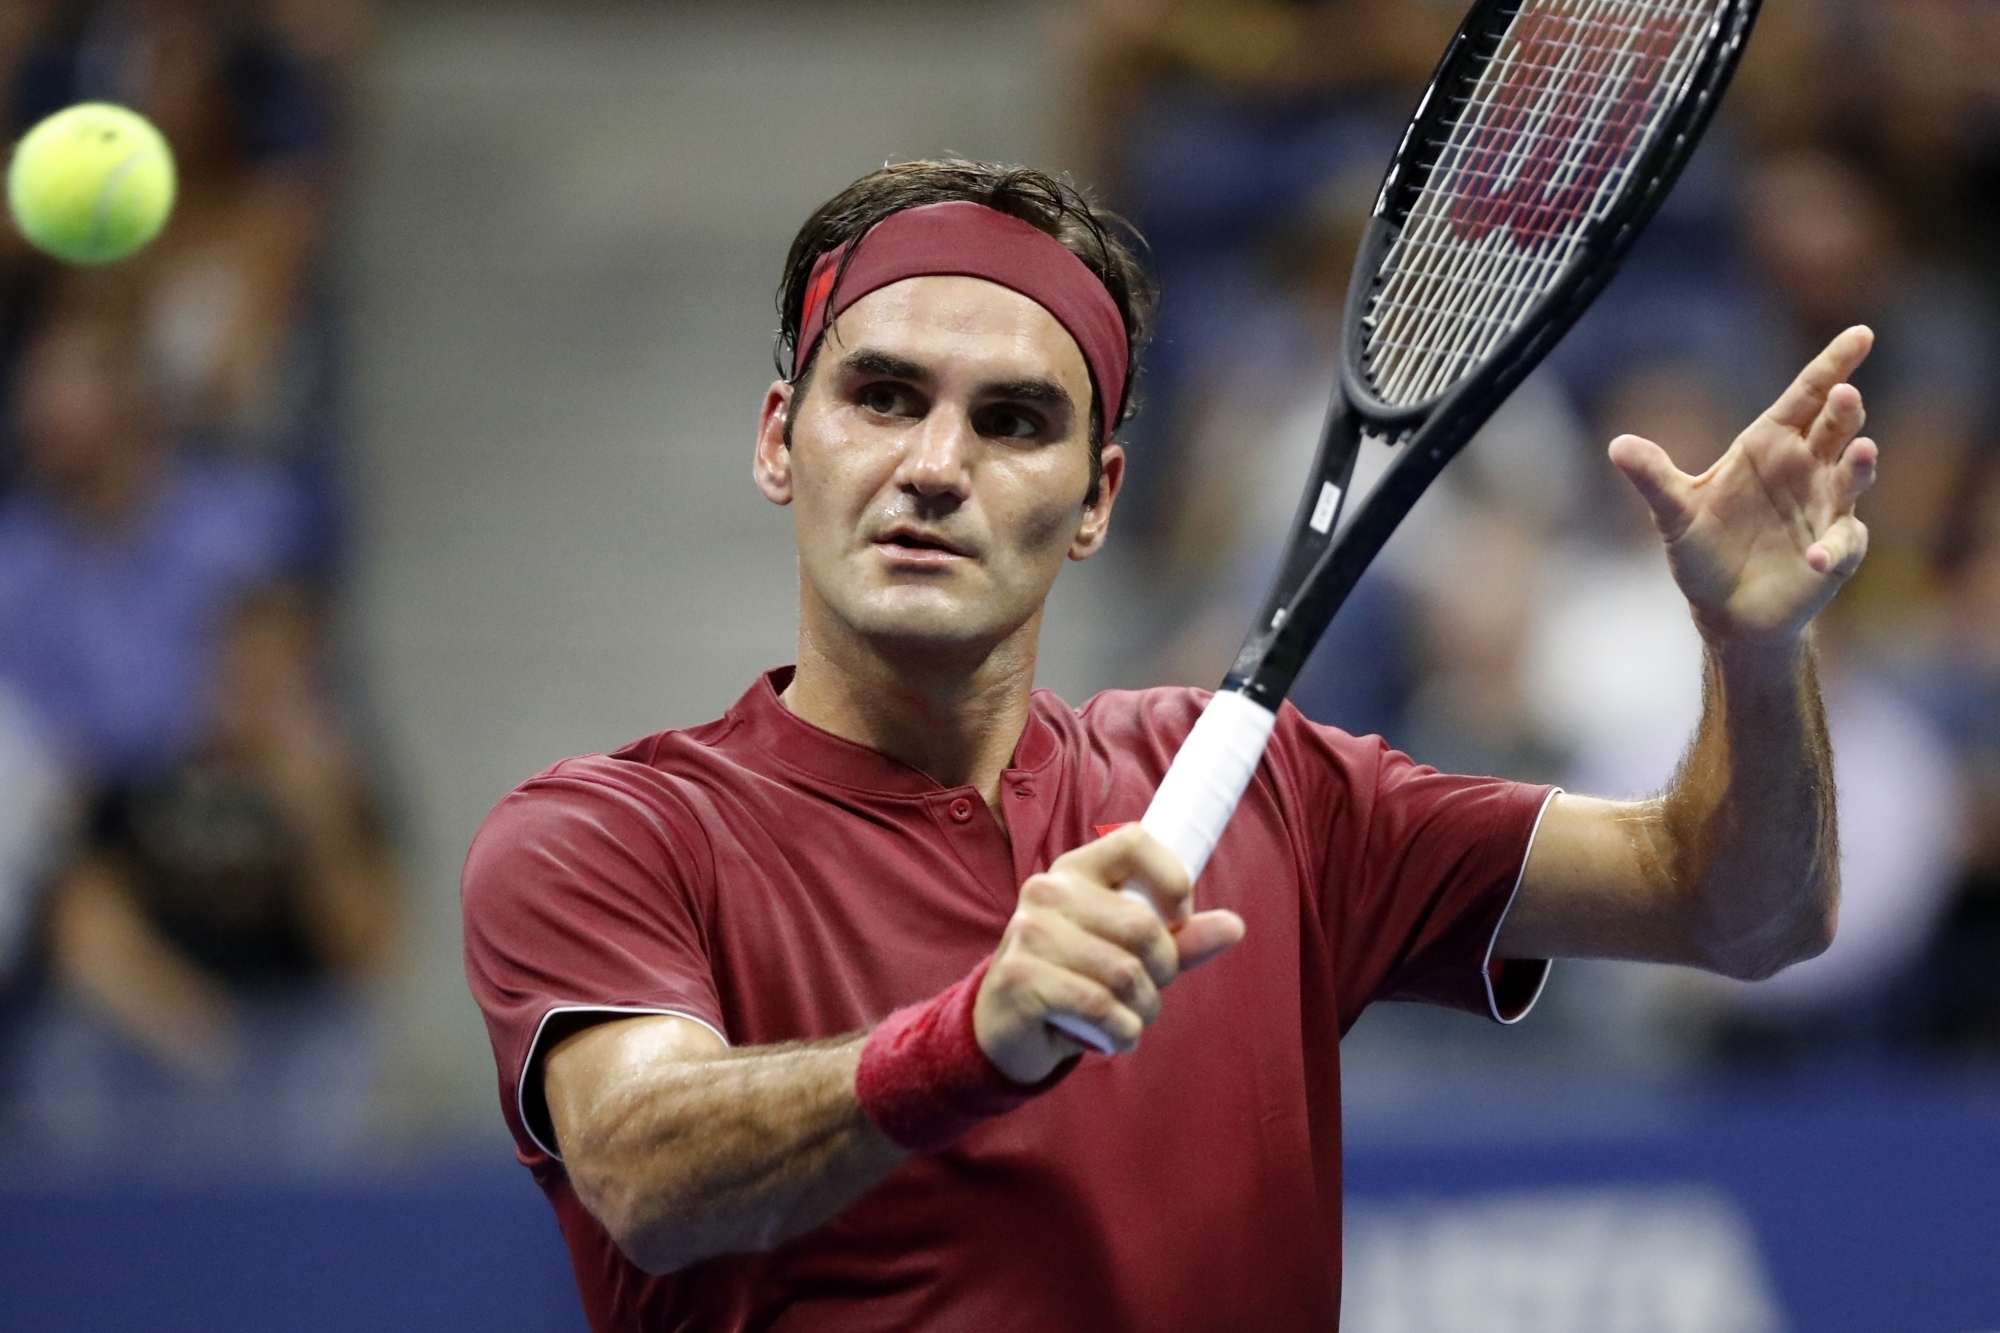 Swiss legend Roger Federer stresses importance of maintaining 'integrity' in tennis